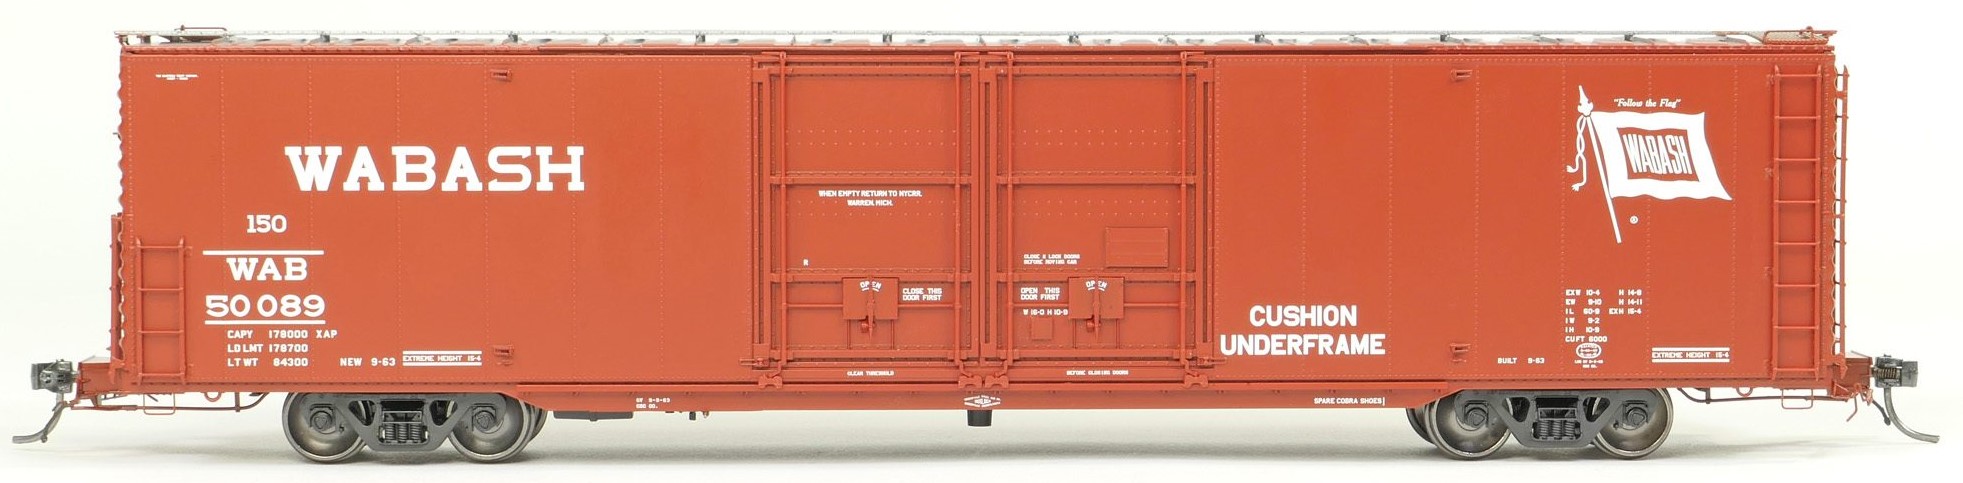 Tangent Scale Models HO 33013-04 Greenville 6,000CuFt 60' Double Door Box Car Wabash 'Delivery Red 9-1963' WAB #50089